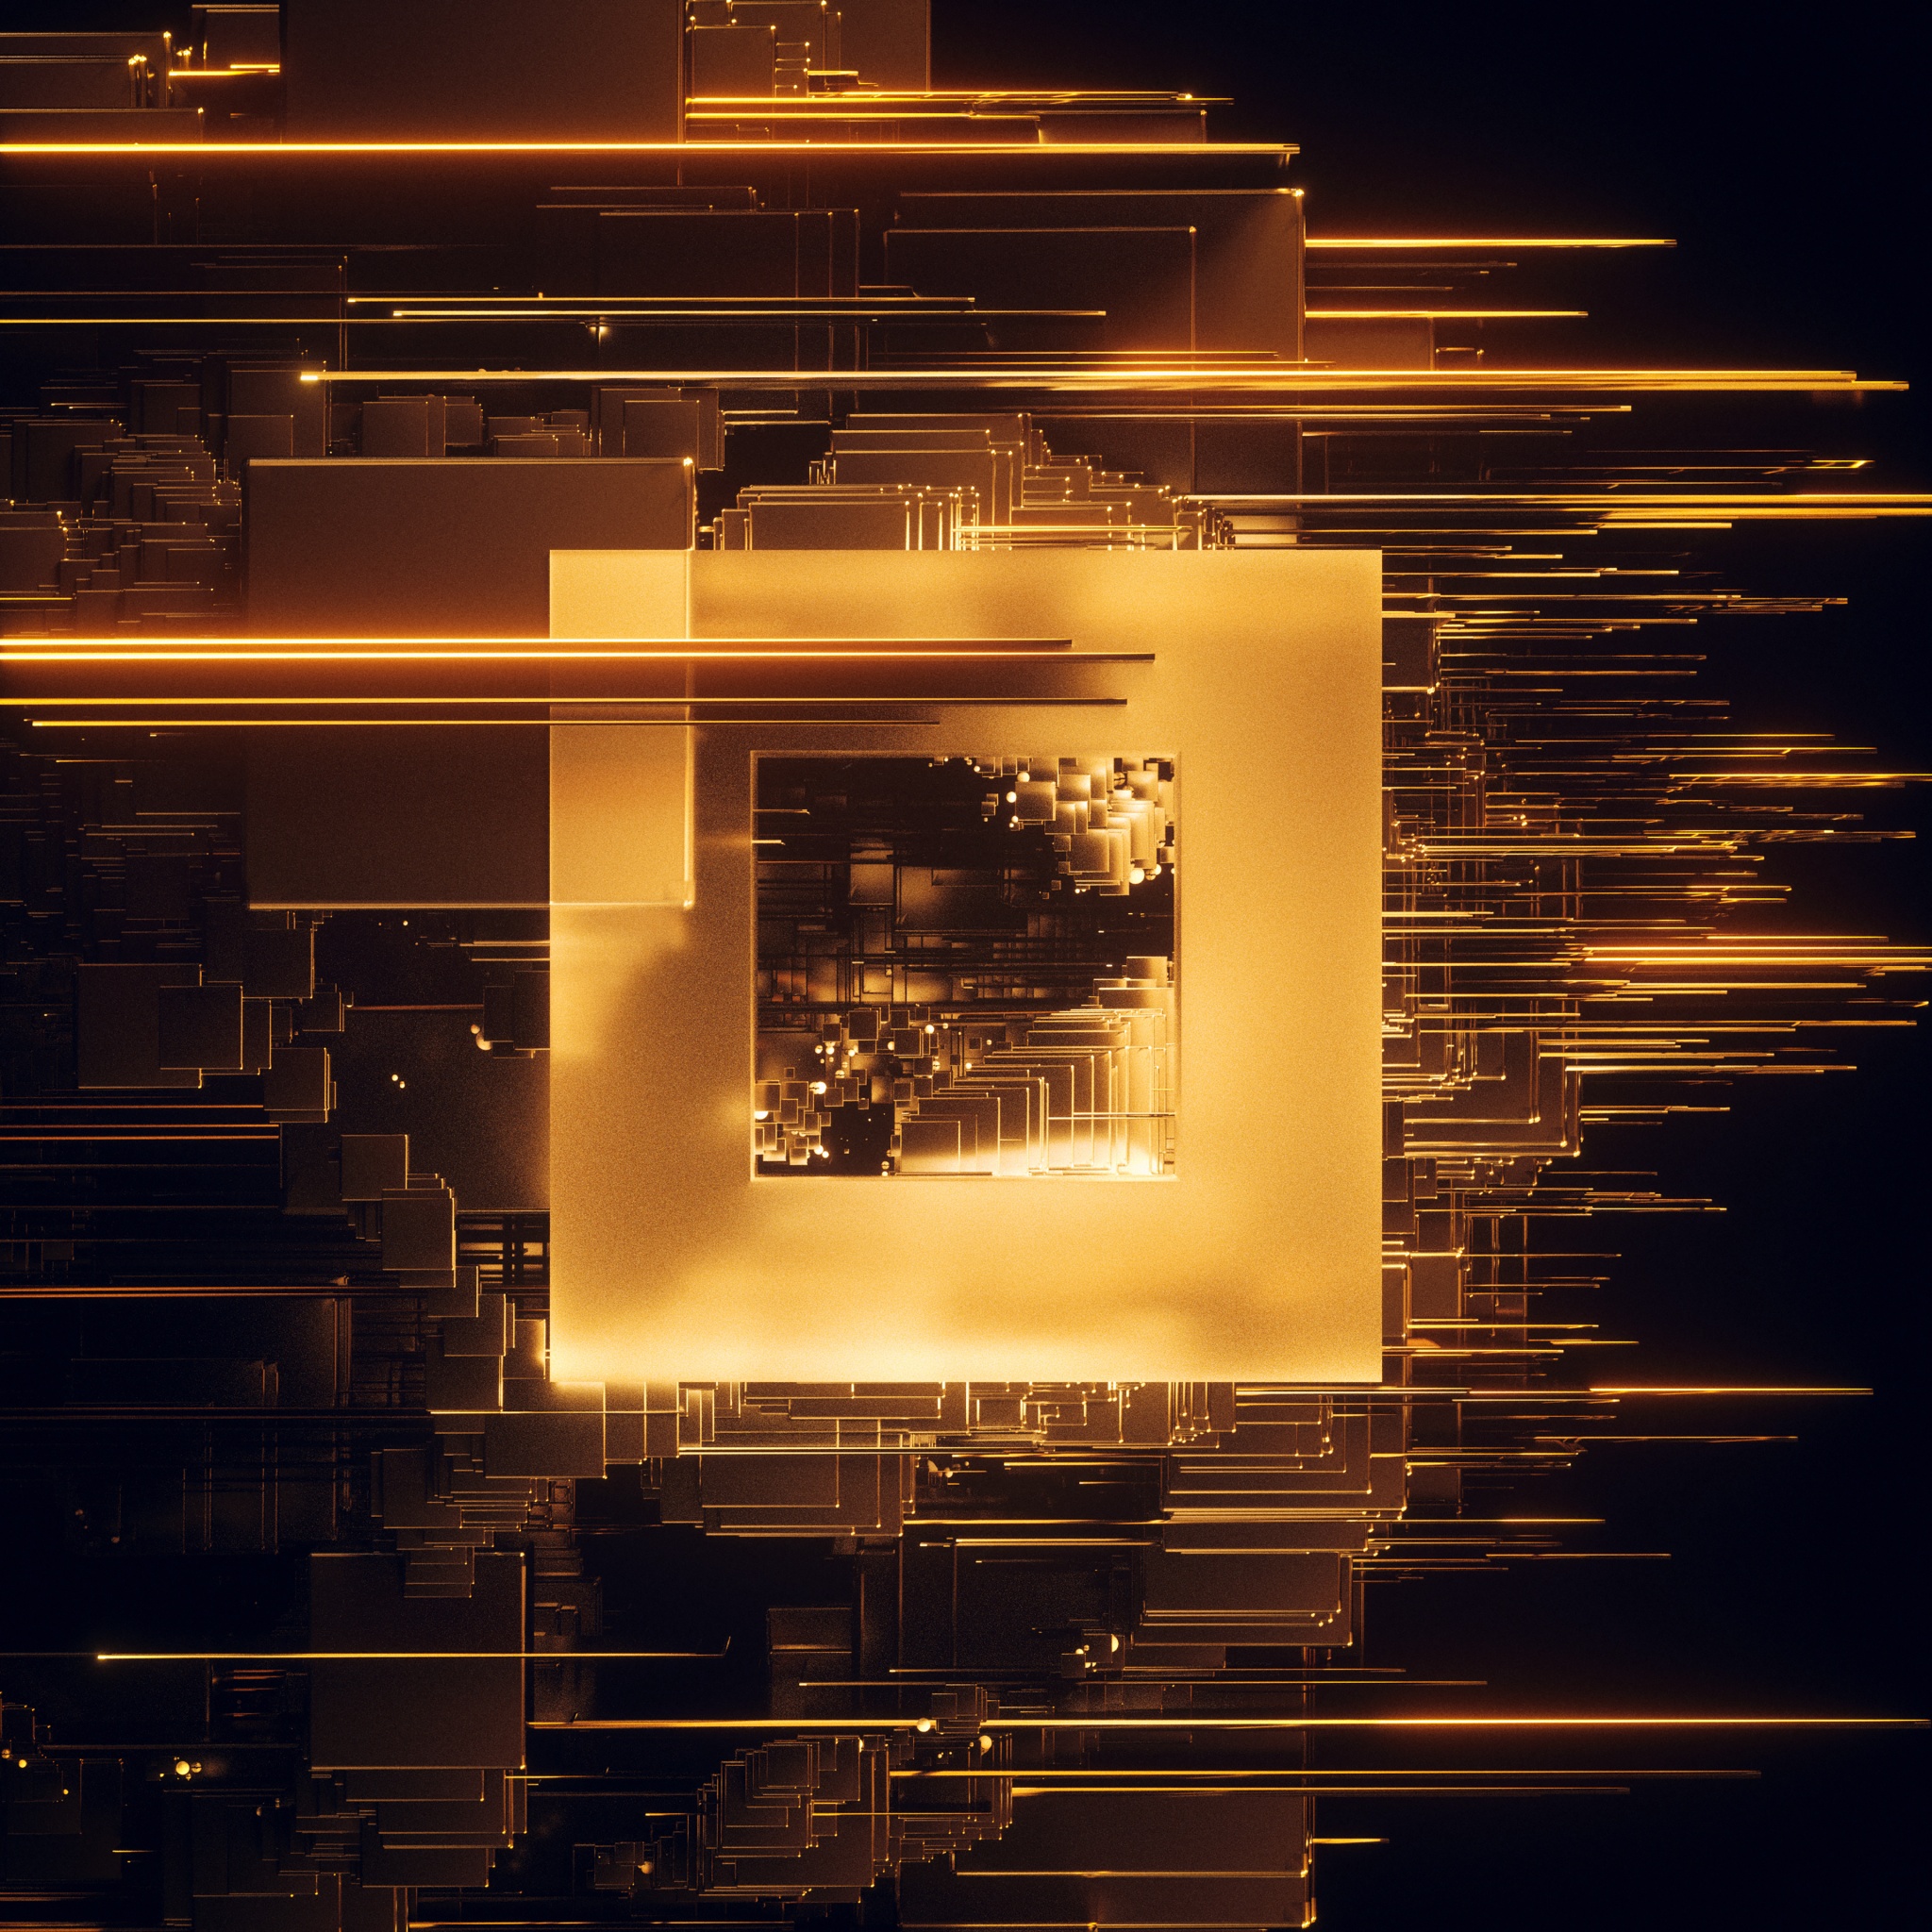 Top 999+ Black And Gold Wallpaper Full HD, 4K✓Free to Use